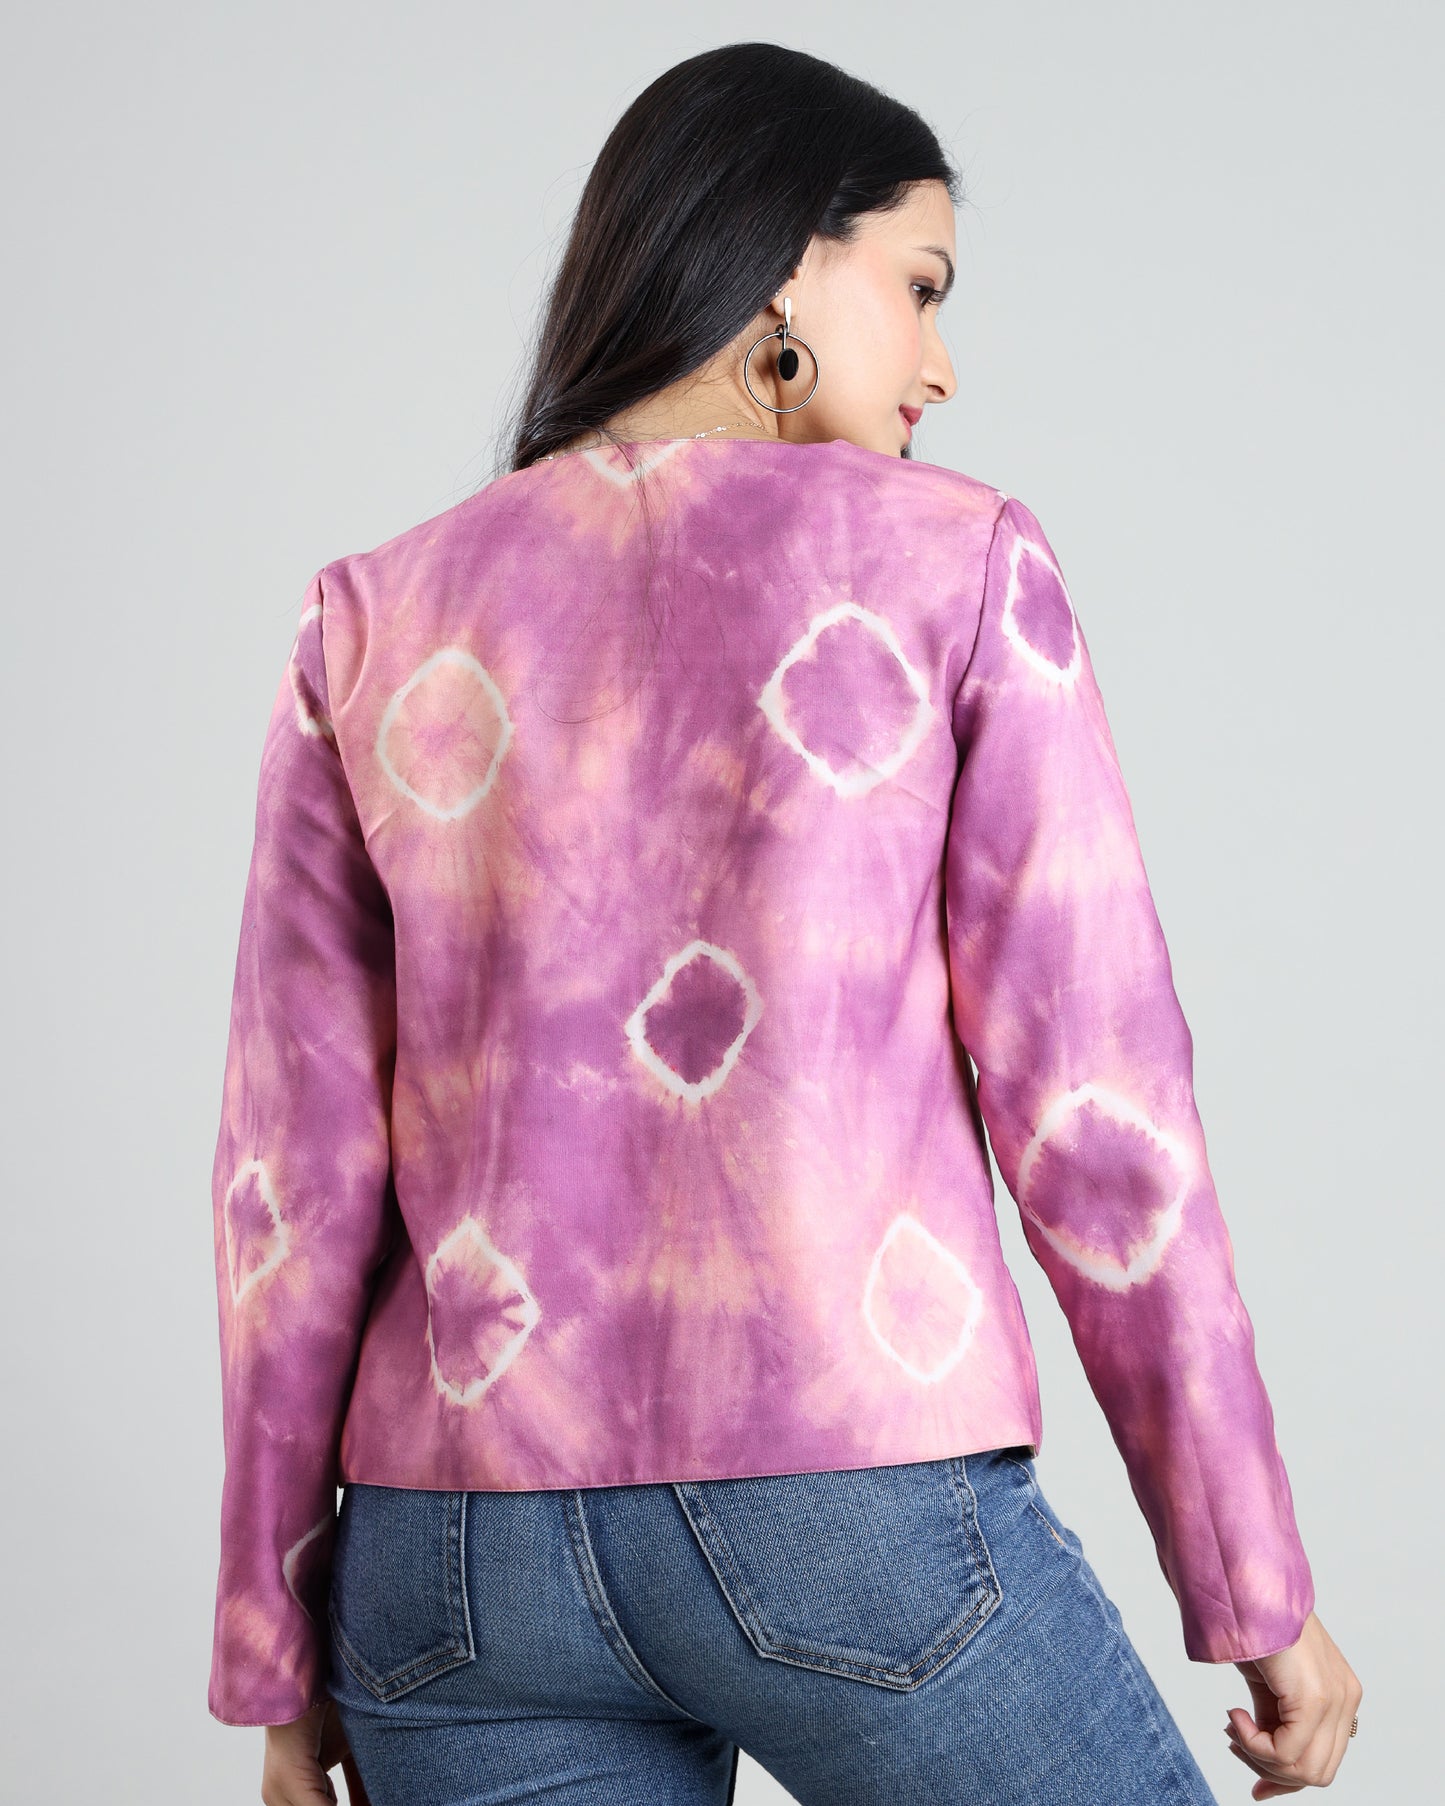 Duo Style Tie And Dye Reversible Women's Jacket